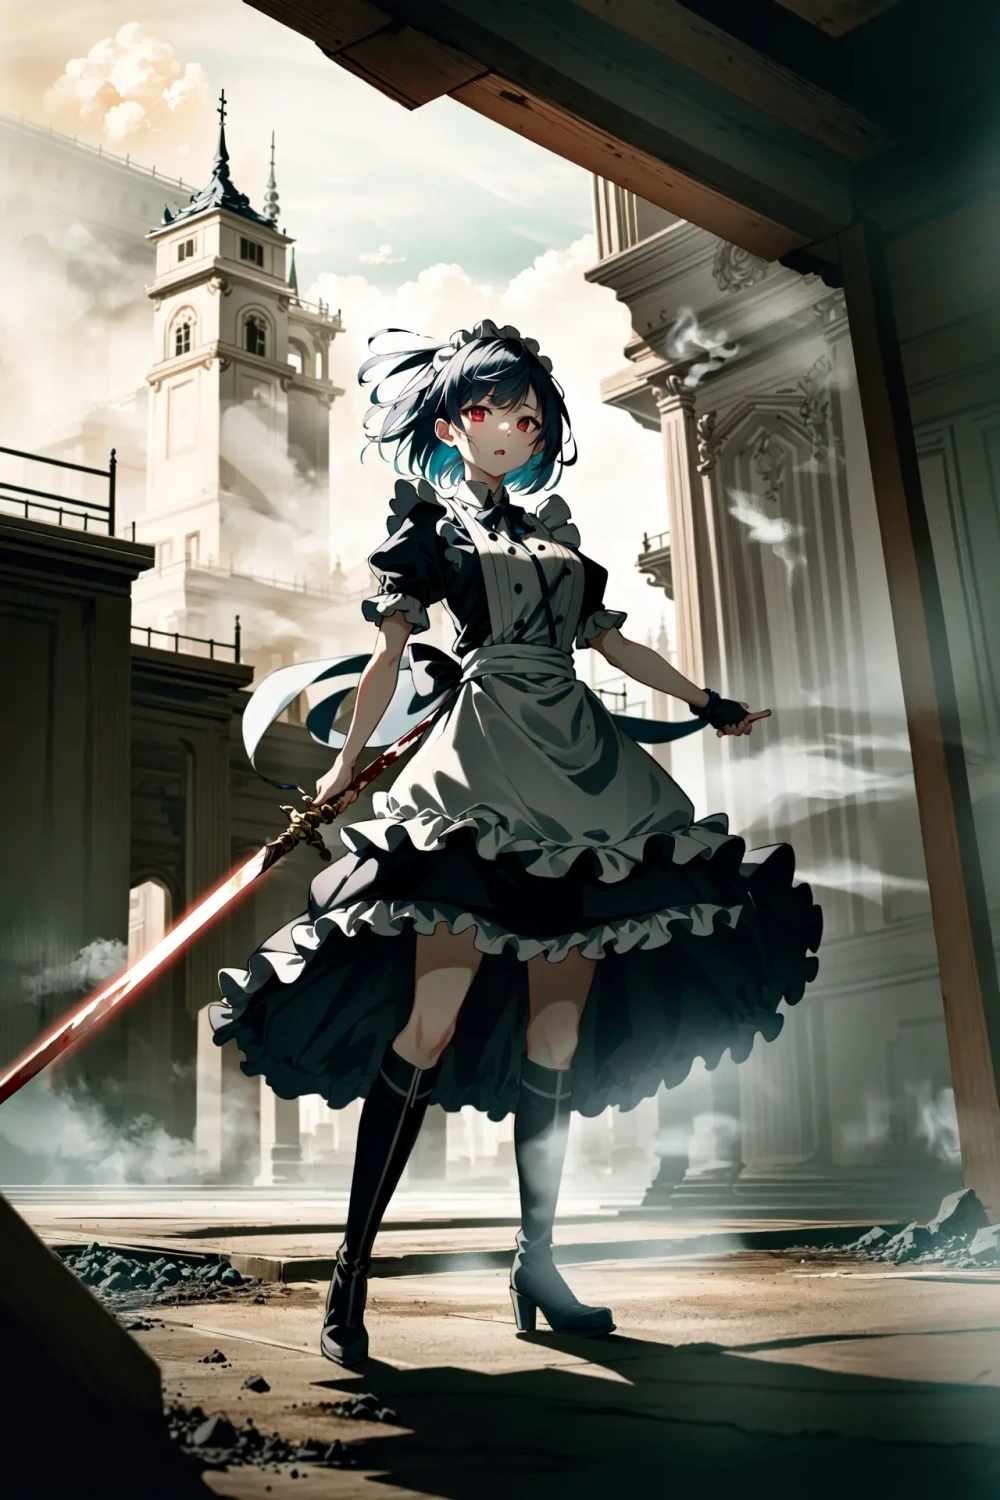 maid-anime-style-all-ages-19